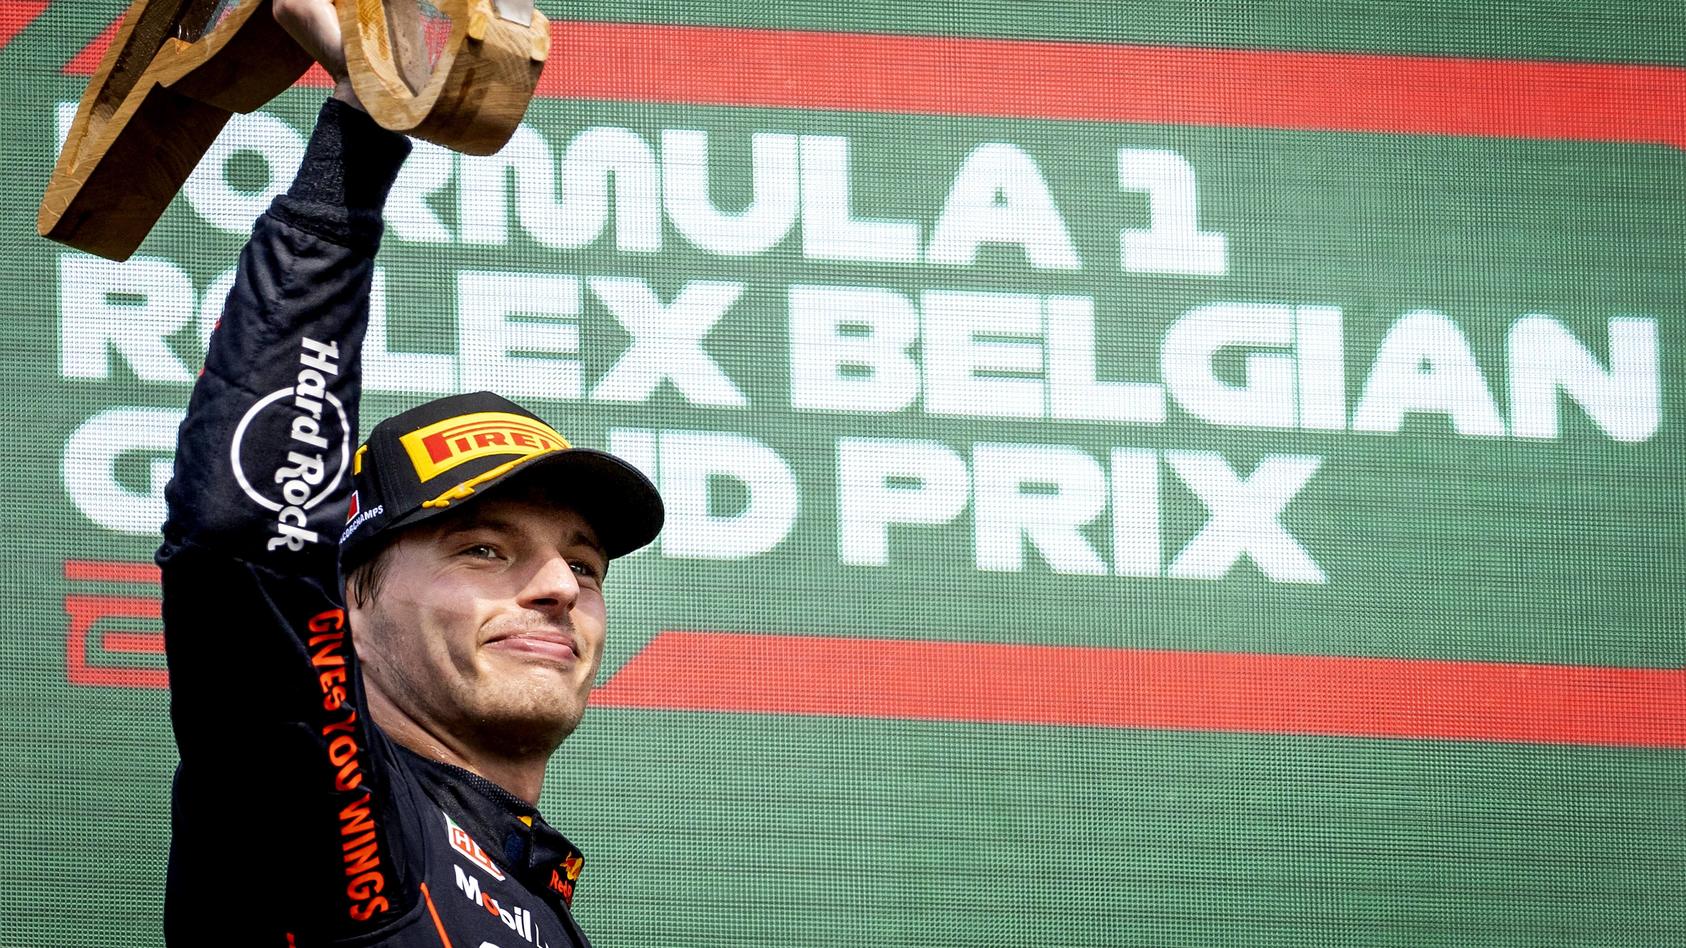  SPA - Max Verstappen celebrates his victory after the F1 Grand Prix of Belgium at the Circuit of Spa-Francorchamps on August 29, 2022 in SPA, Belgium. REMKO DE WAAL F1 Grand Prix of Belgium 2022 xVIxANPxSportx/xxANPxIVx *** SPA Max Verstappen celebr